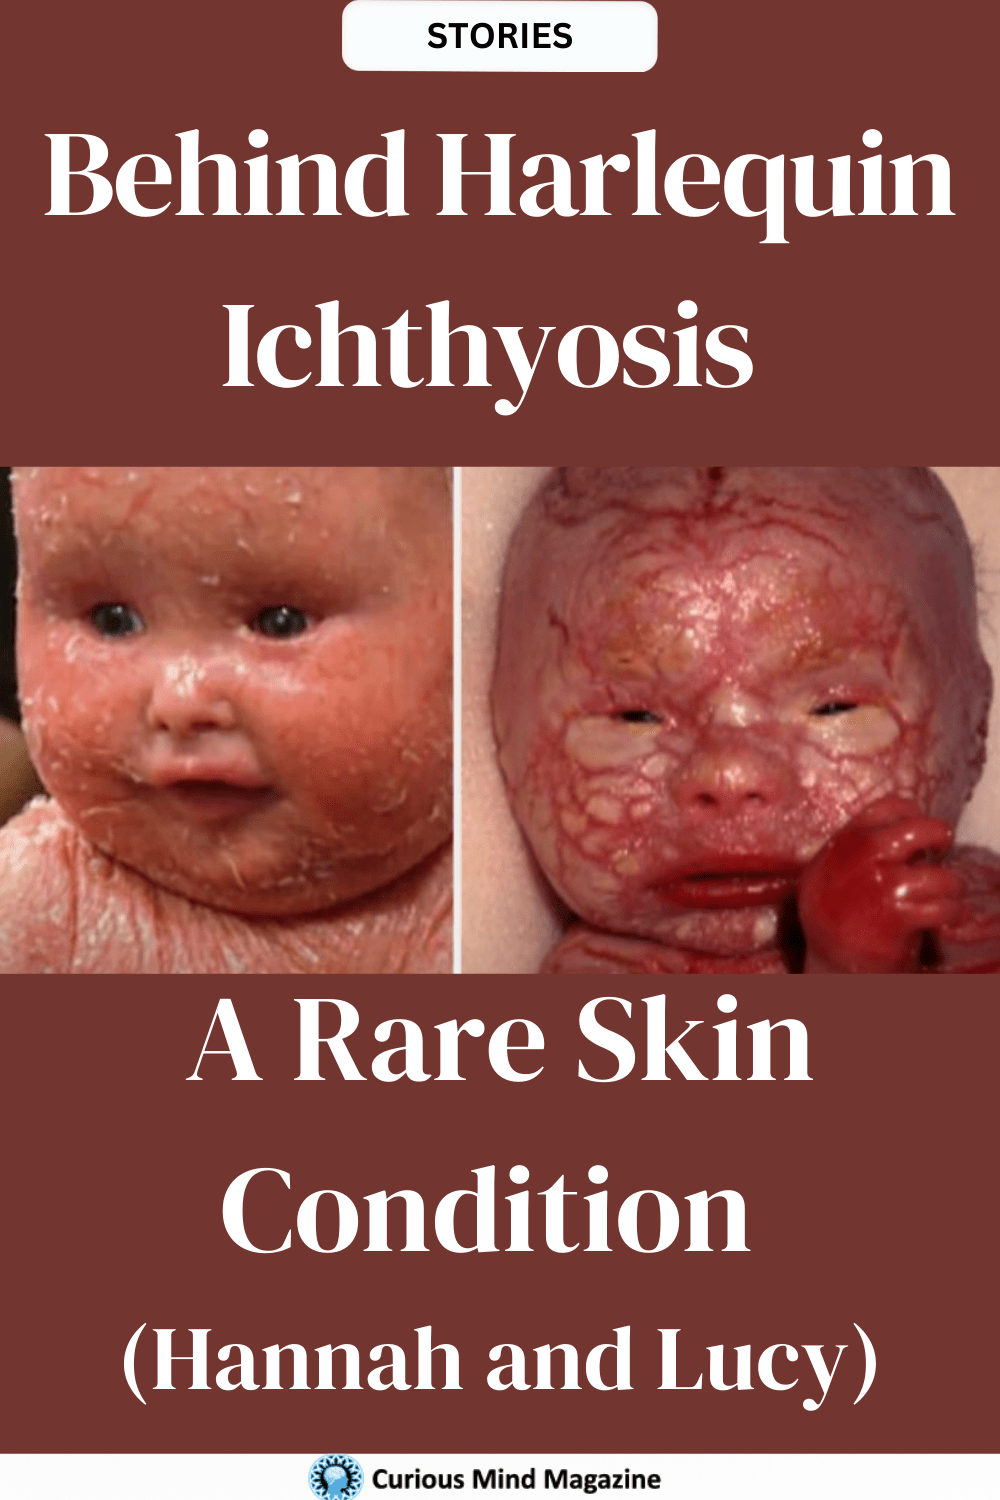 Behind Harlequin Ichthyosis - A Rare Skin Condition (Hannah and Lucy)